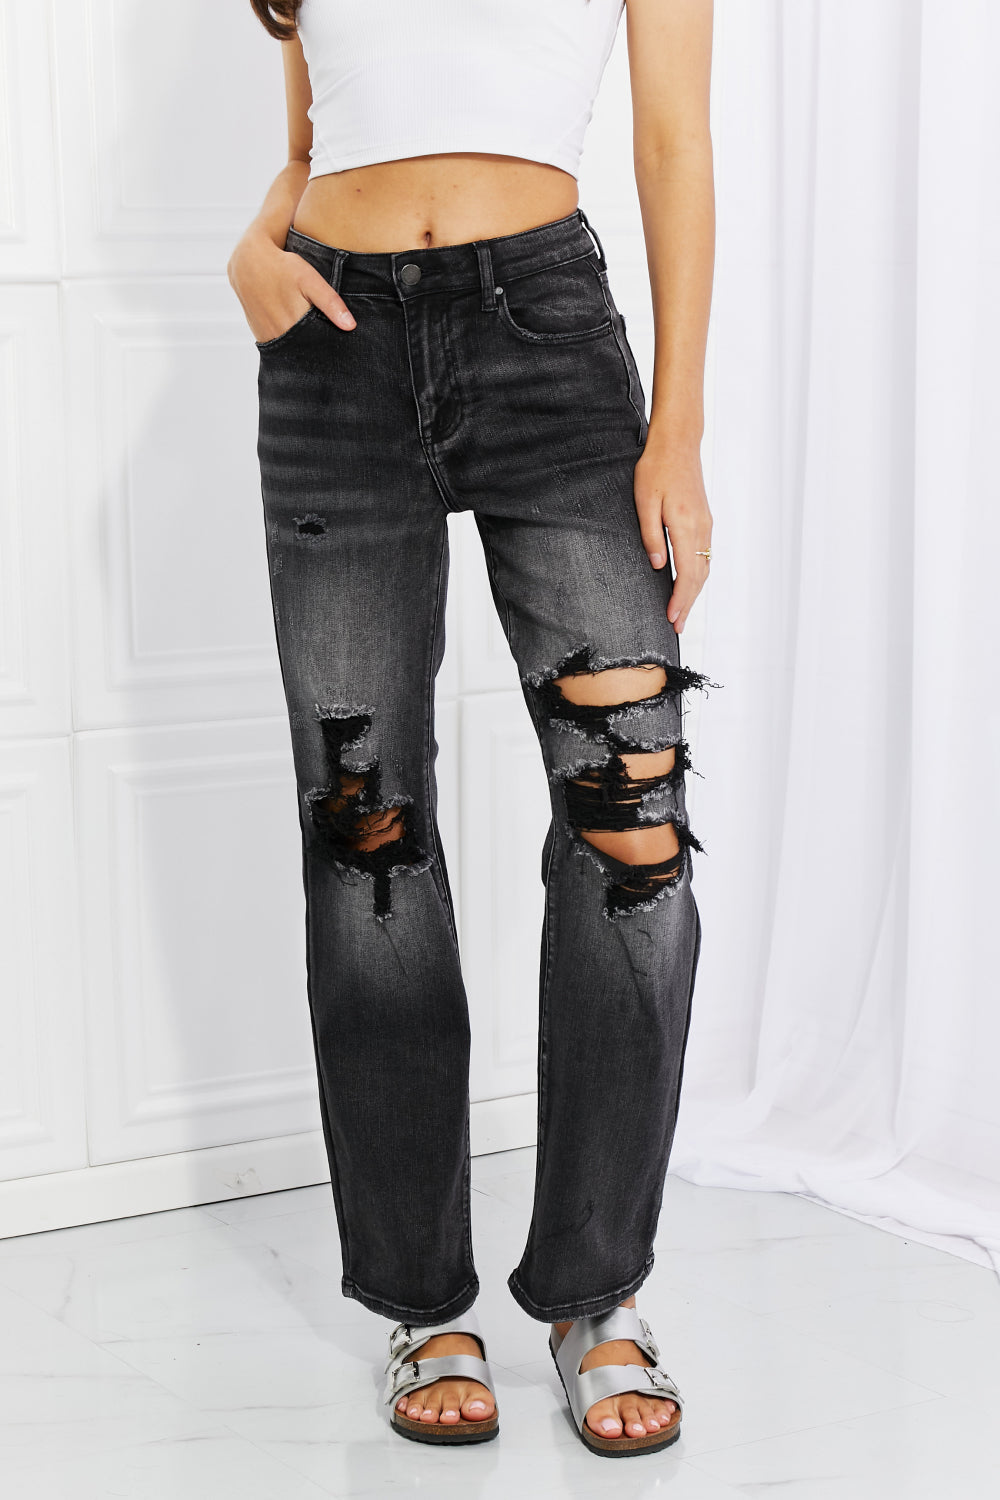 Black Skinny Zip Black Ripped Jeans Mens For Men Designer Ripped Denim With  Cotton Stretch, Slim Fit And High Street Style From Eqzhi, $35.98 |  DHgate.Com